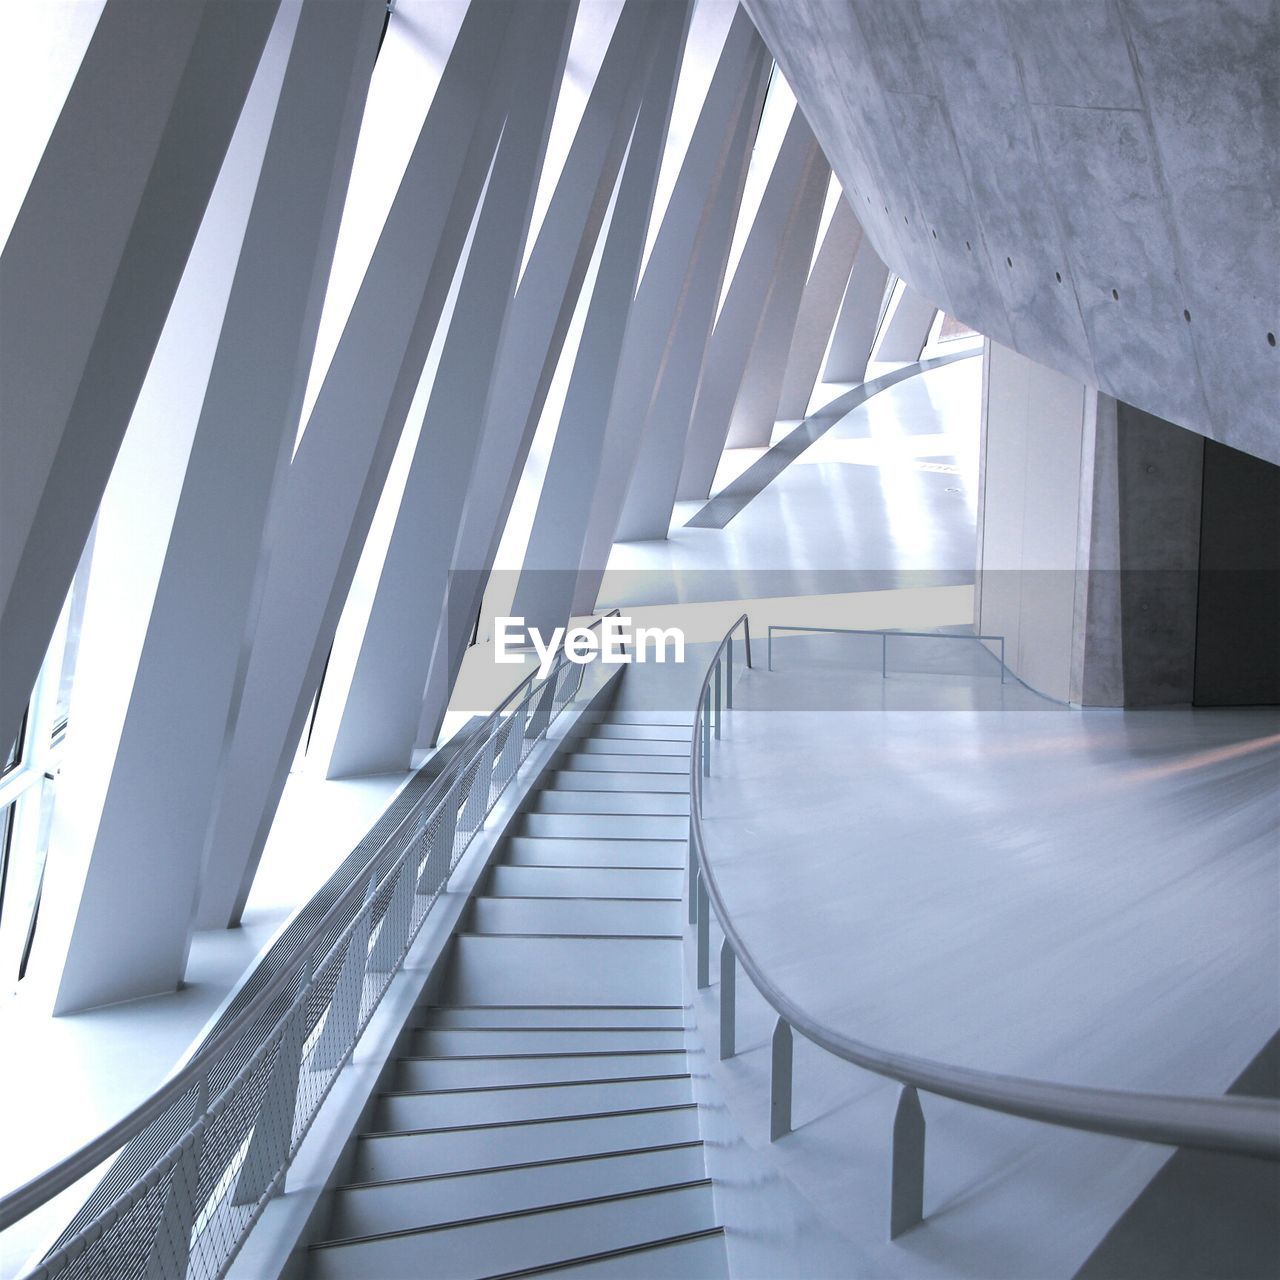 Low angle view of staircase in modern building